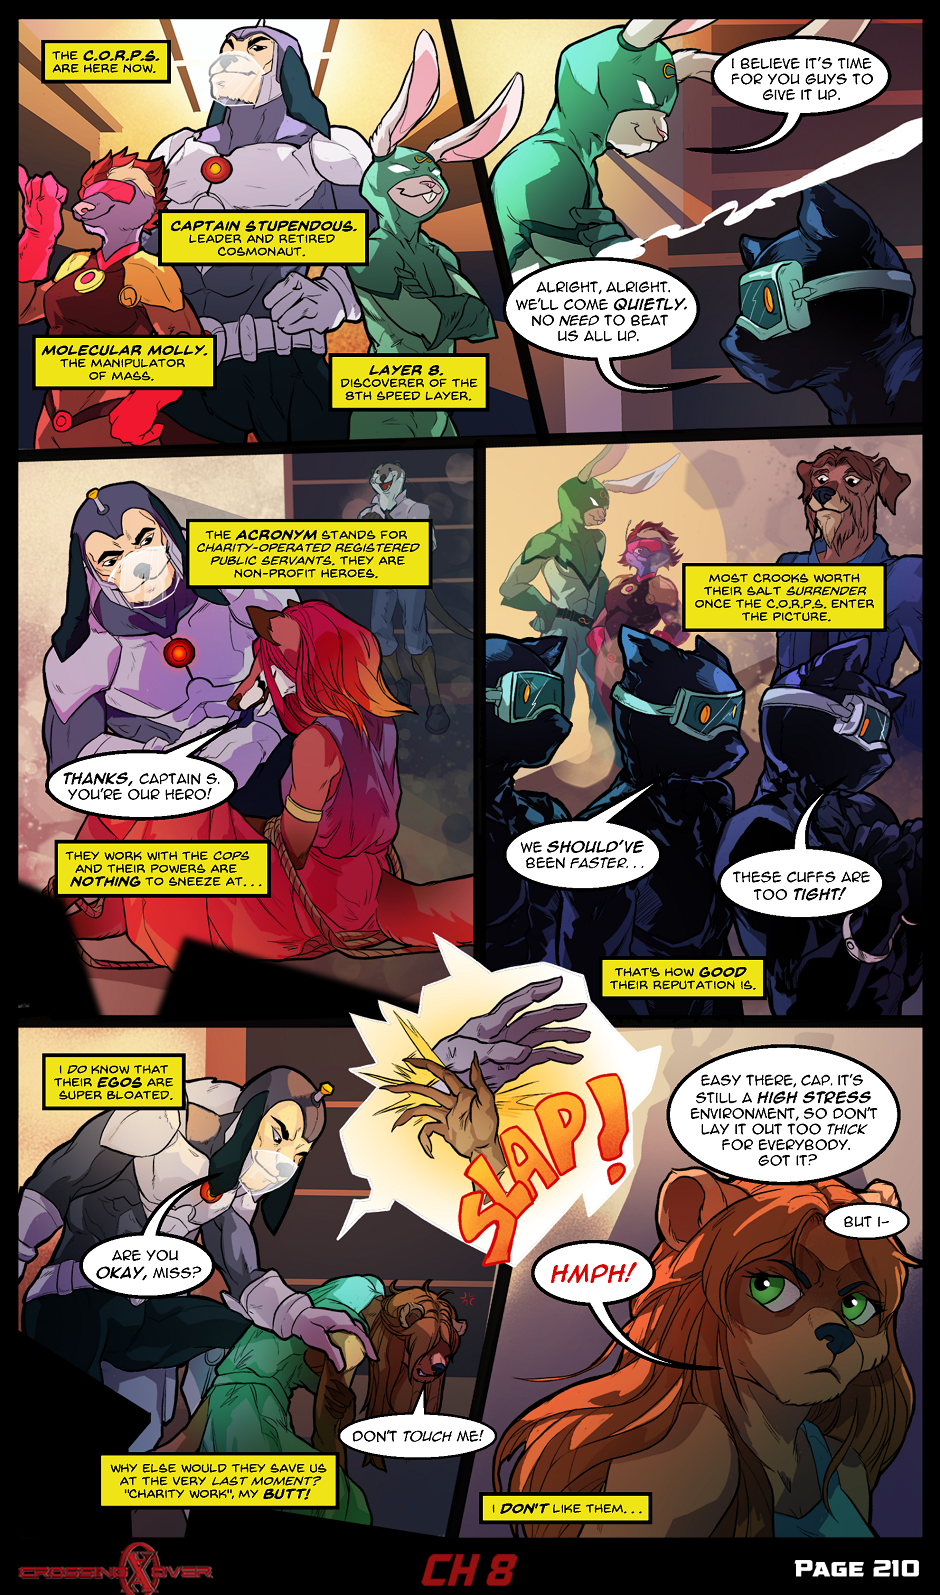 Page 210 (Ch 8)